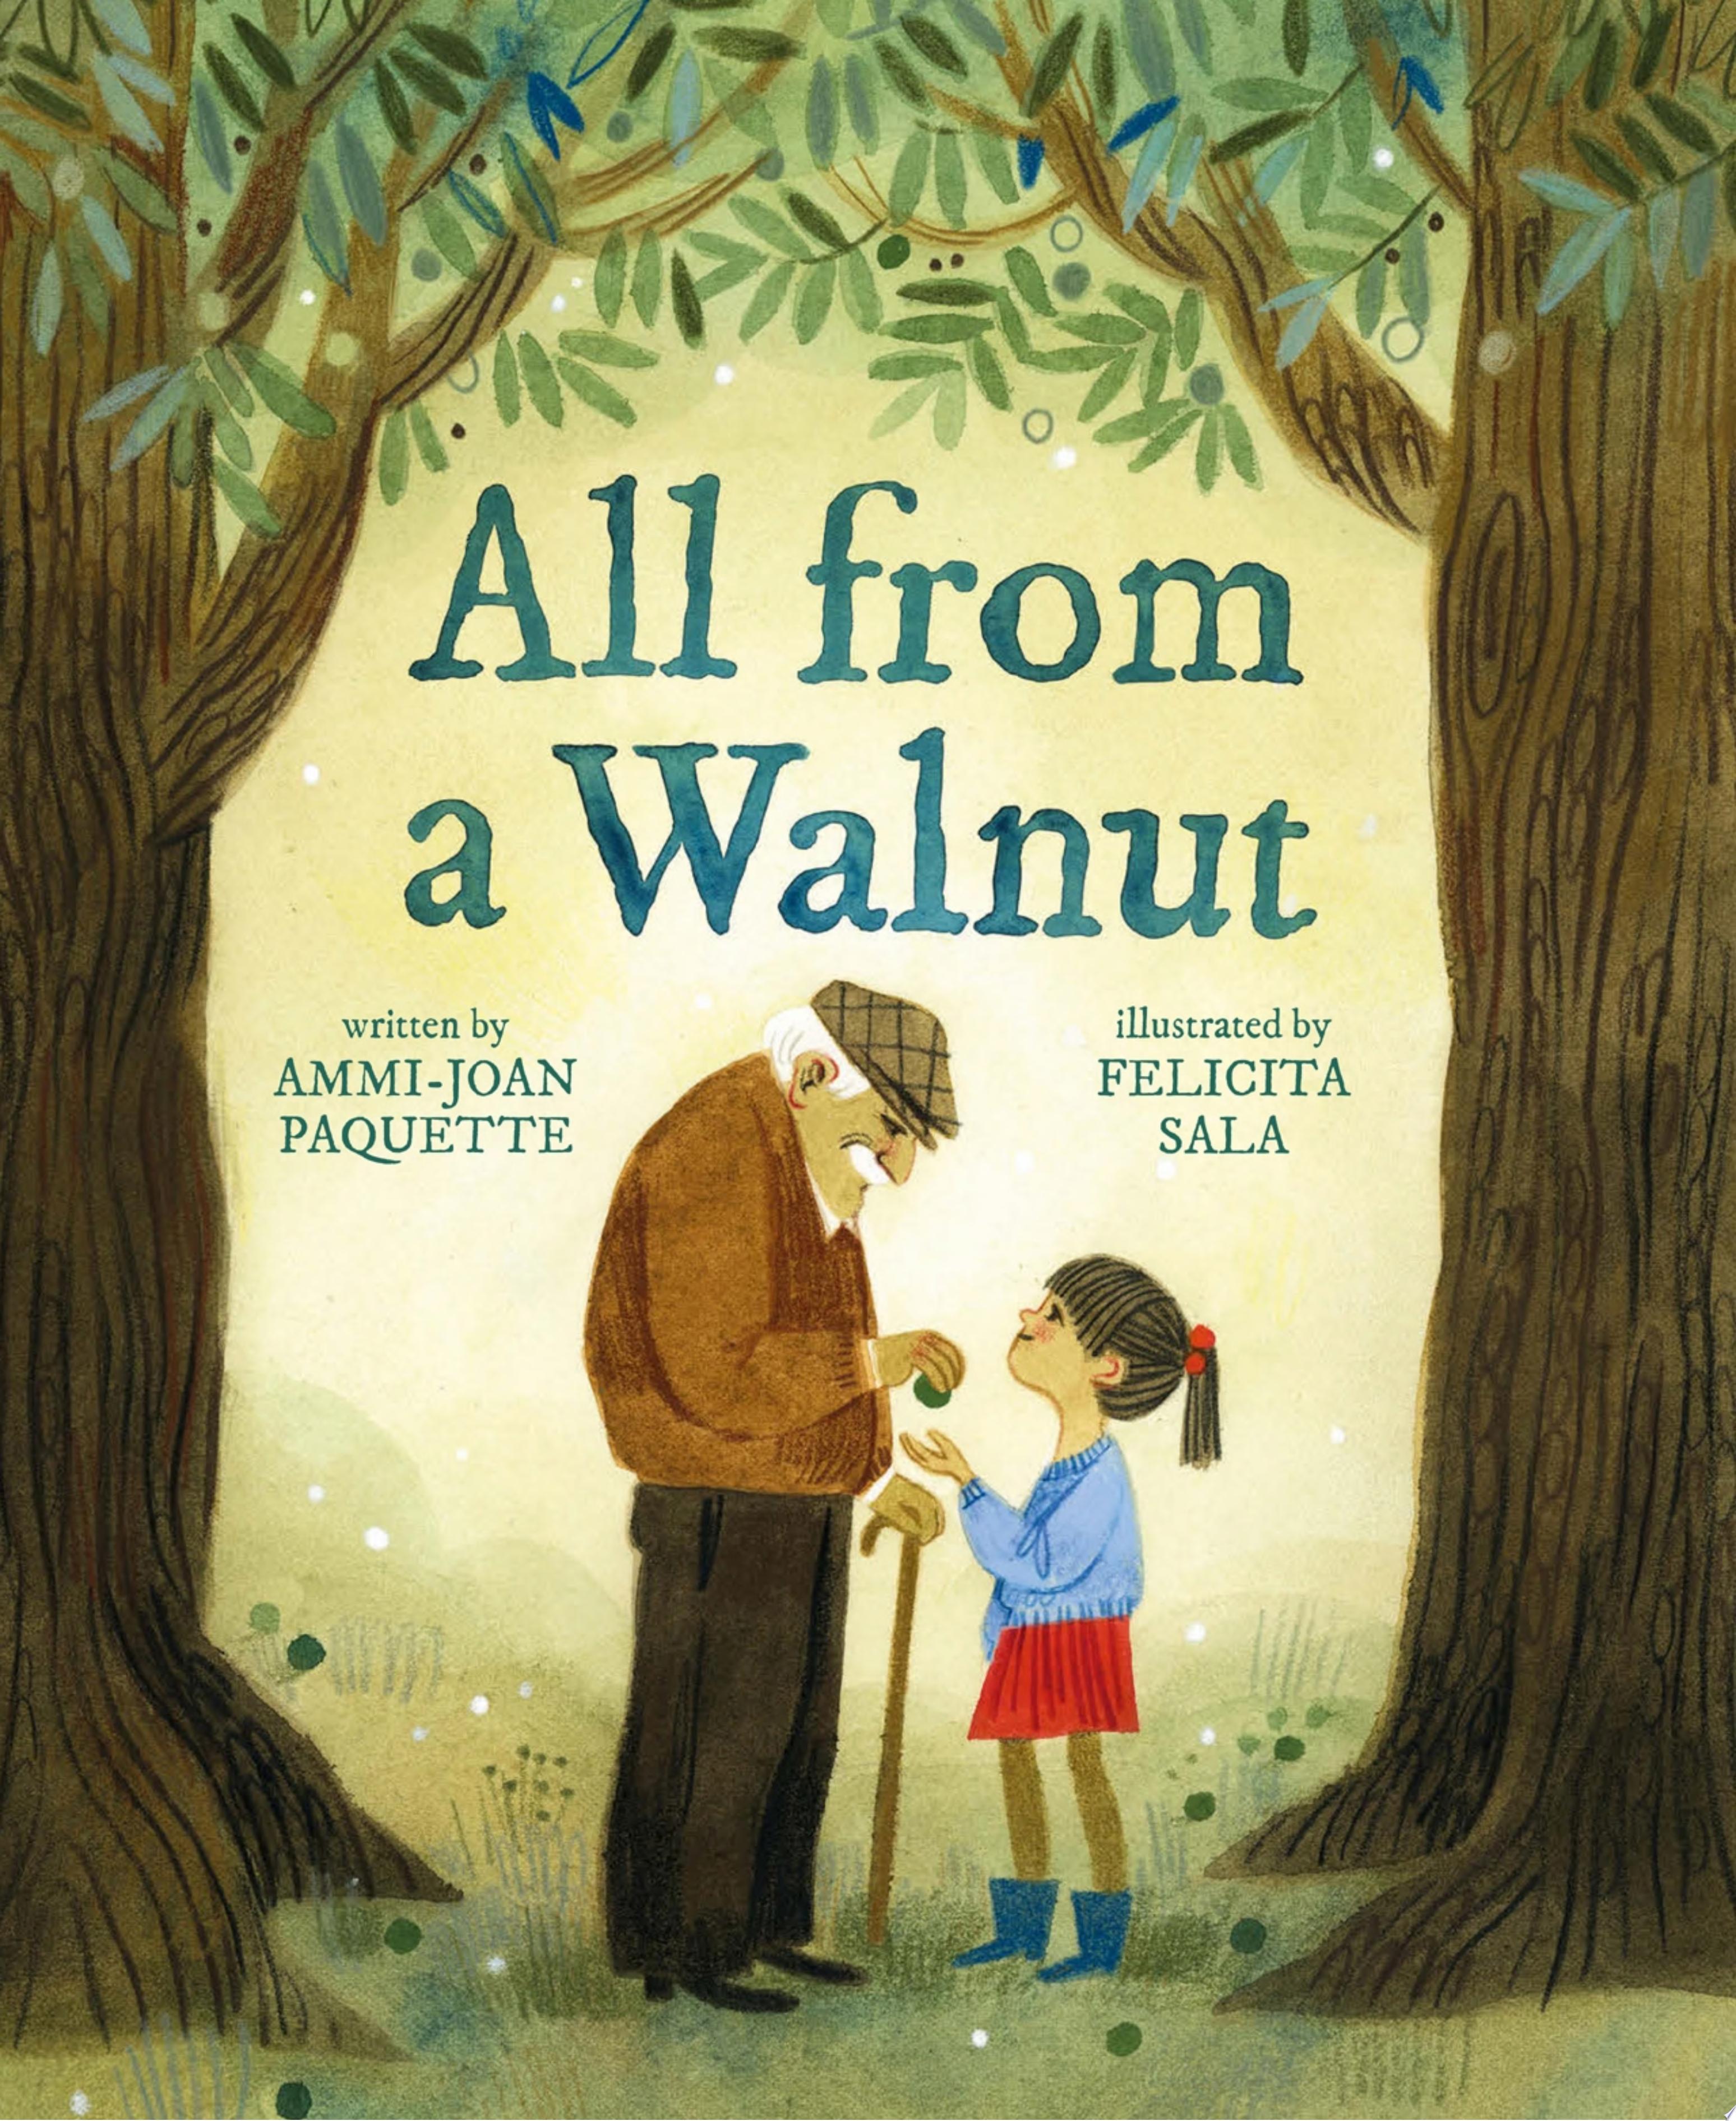 Image for "All from a Walnut"